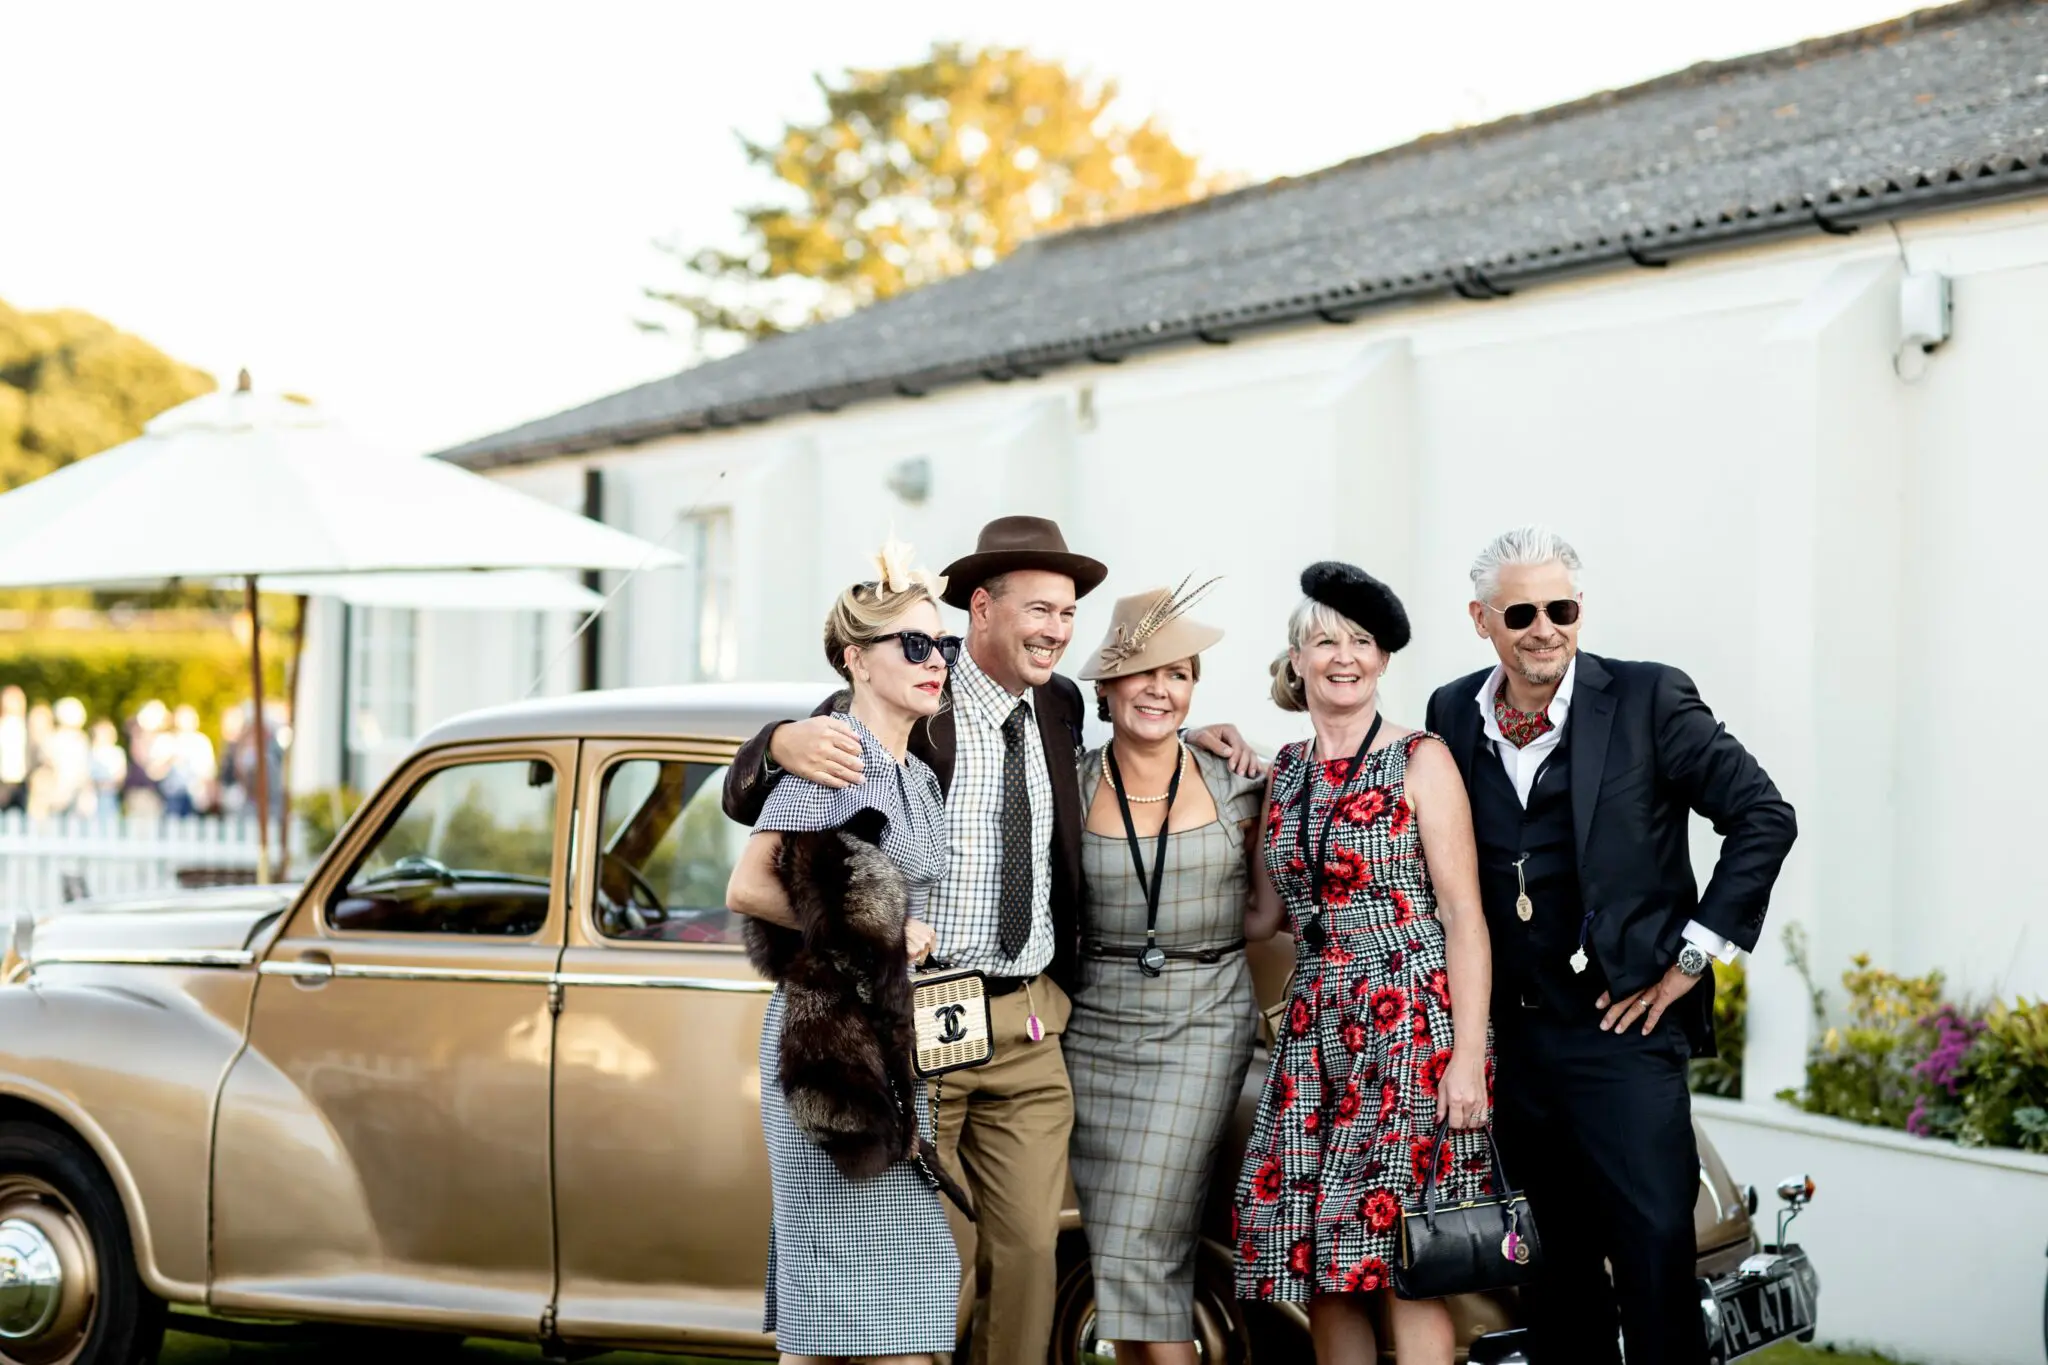 Guests dressed up in vintage attire posing for a photo